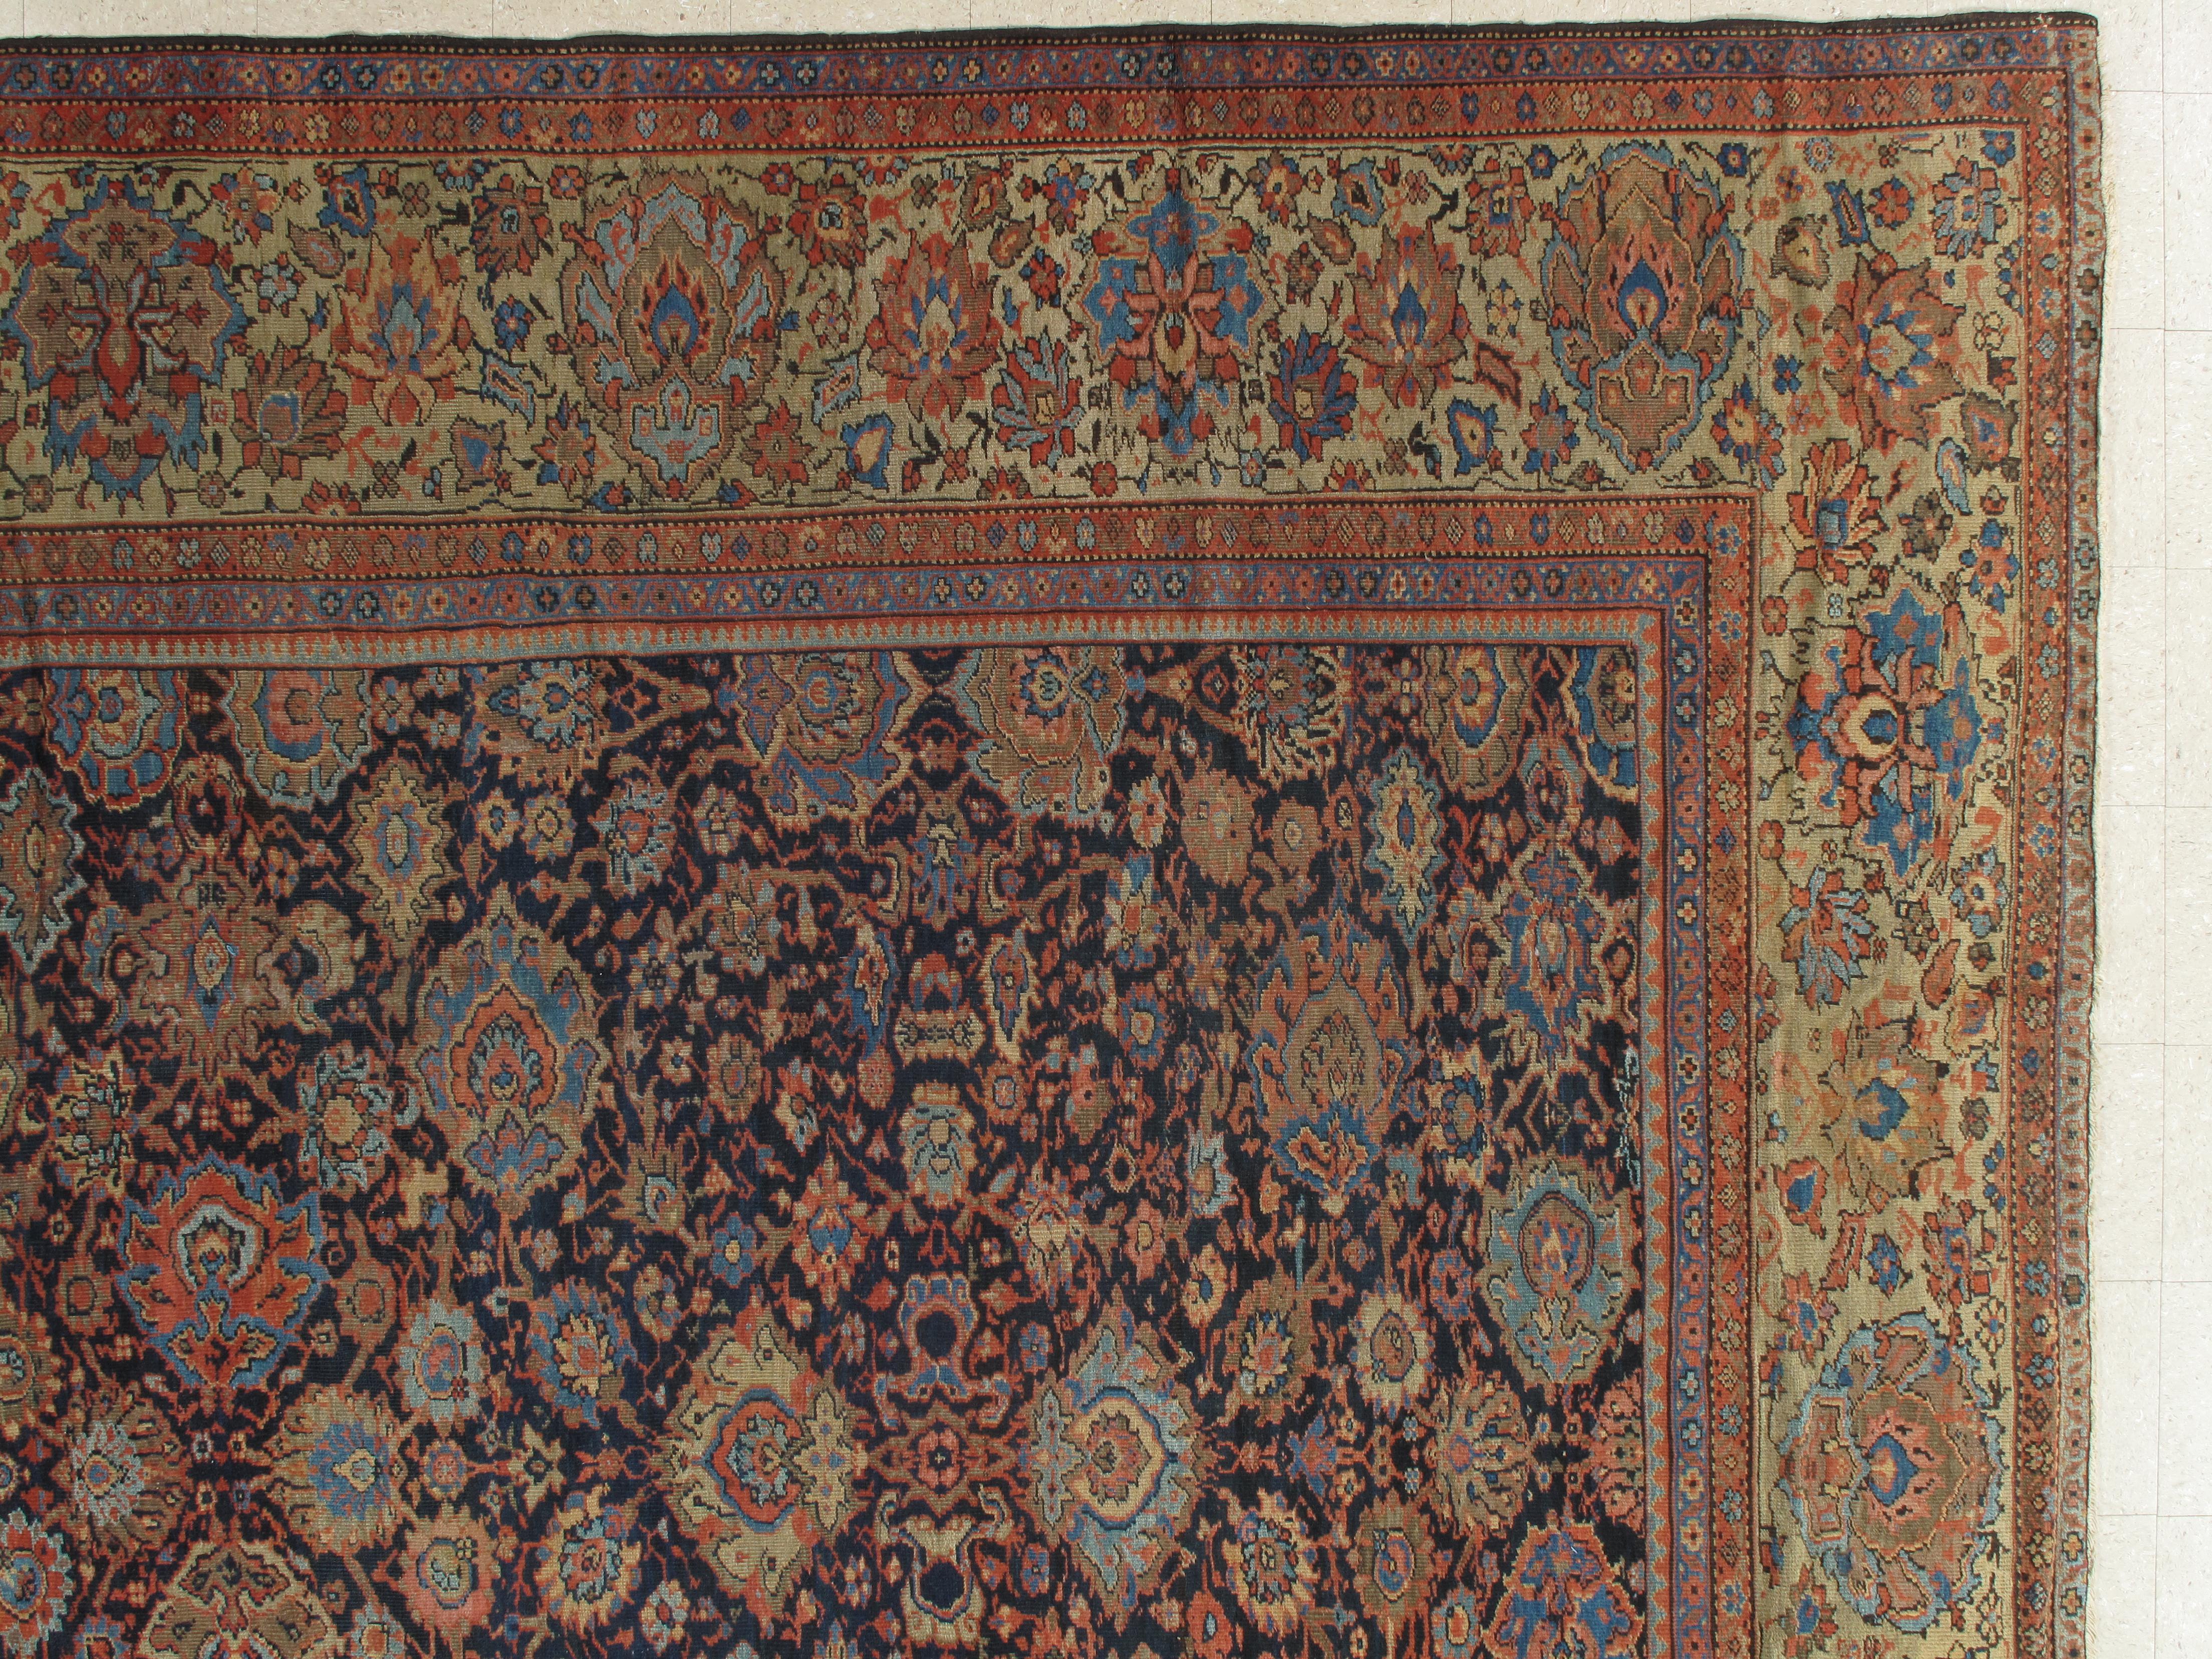 Antique Persian Sultanabad Carpet, Handmade Oriental Rug, Navy Blue, Rust, Gold For Sale 6